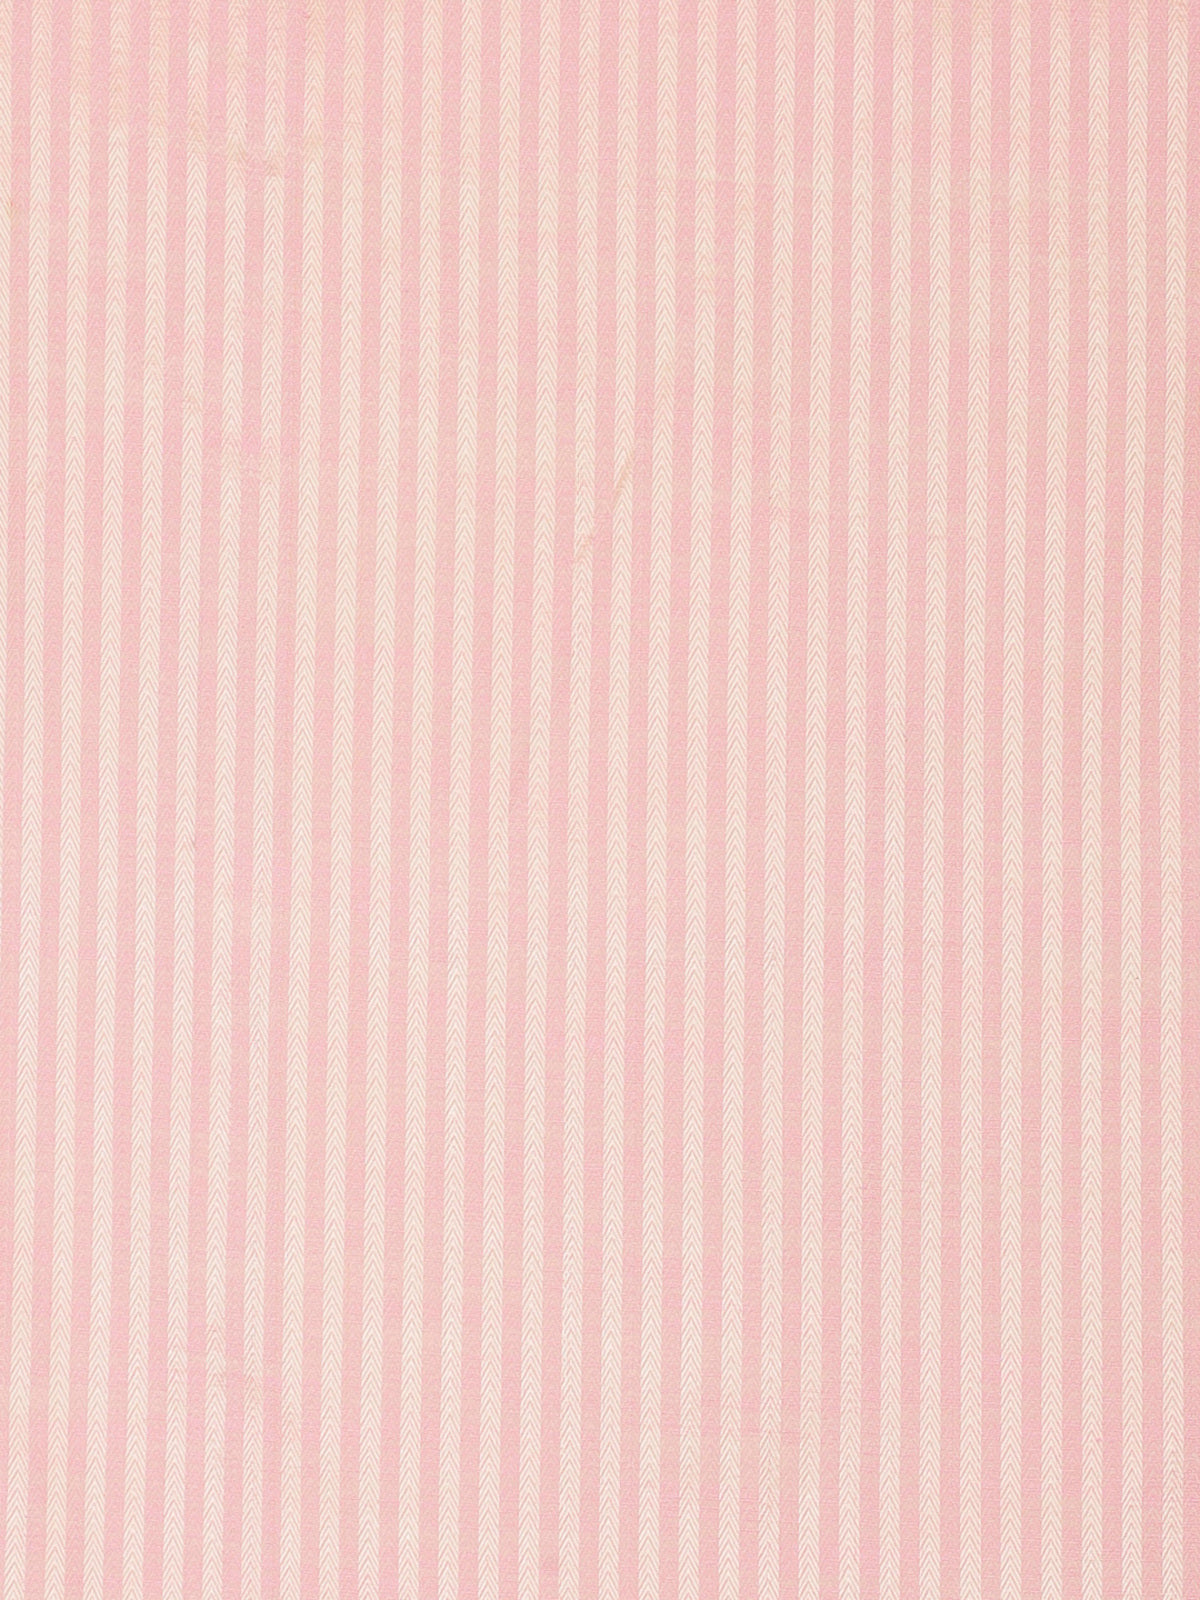 Romee Pink Striped Patterned Set of 2 Door Curtains